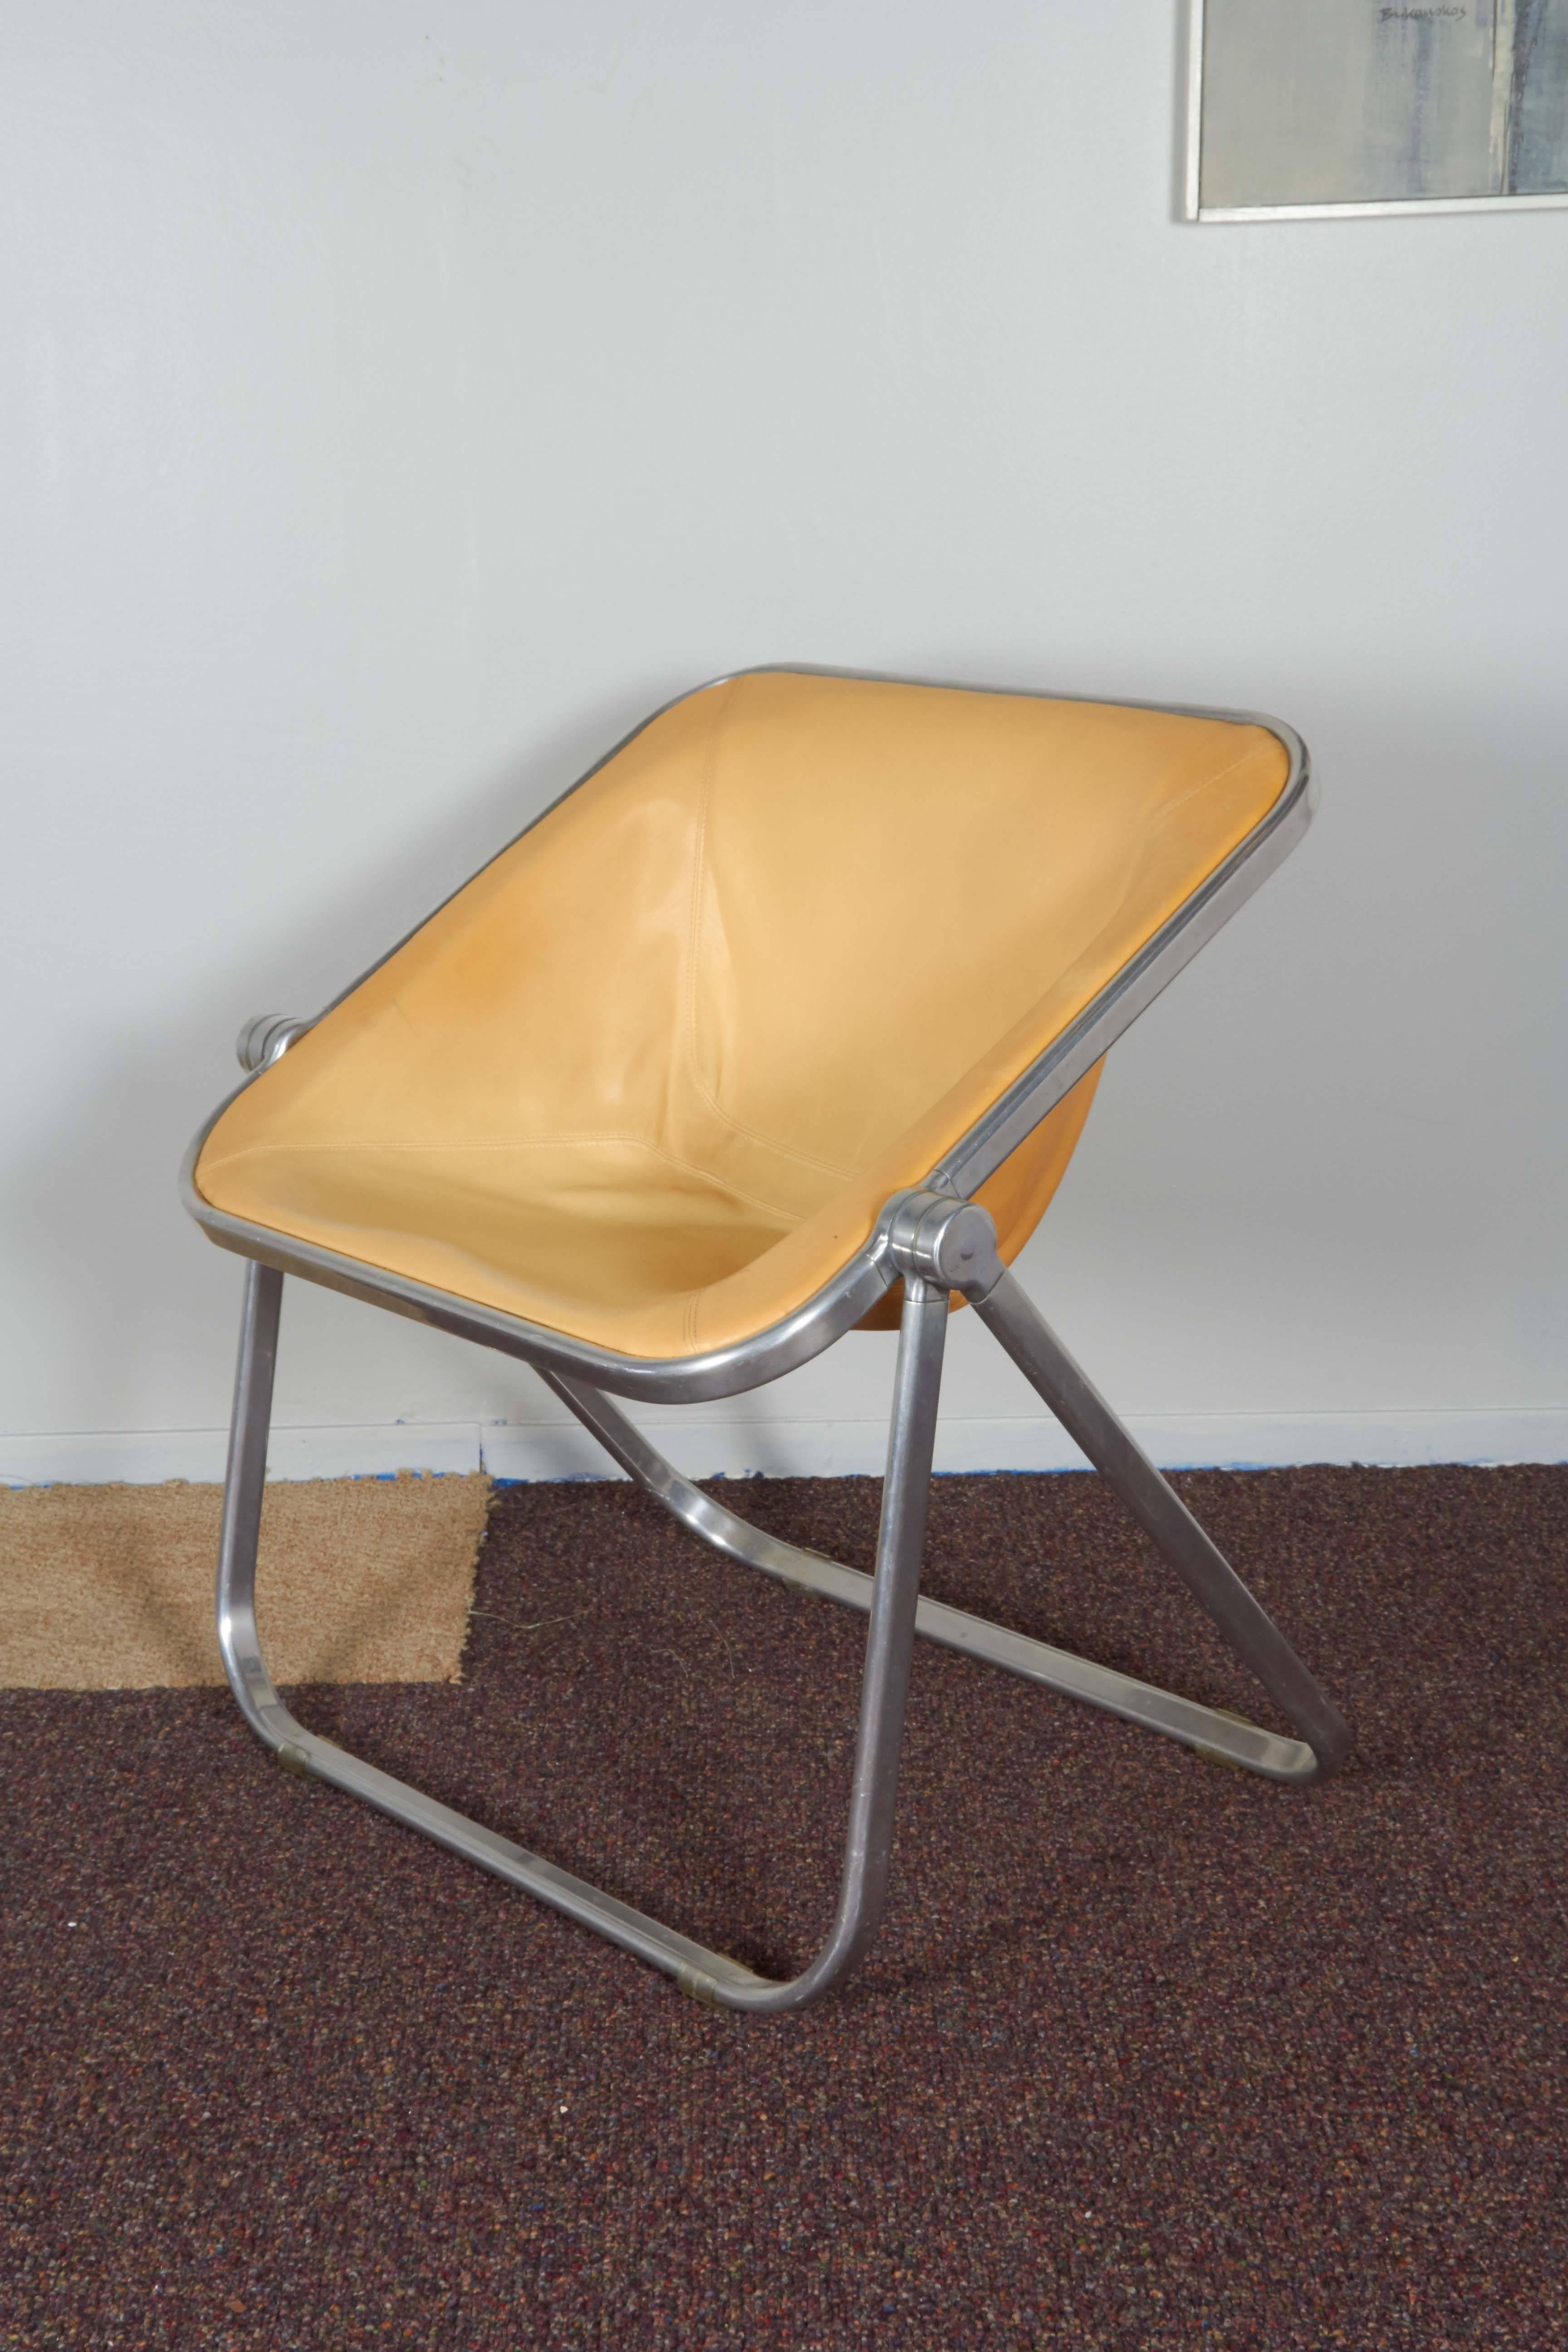 A highly modern folding chair by Italian designer Giancarlo Piretti for Castelli, produced, circa 1970s, with concave seat in yellow leather, against frame in brushed aluminum. Very good vintage condition, wear consistent with age and use.